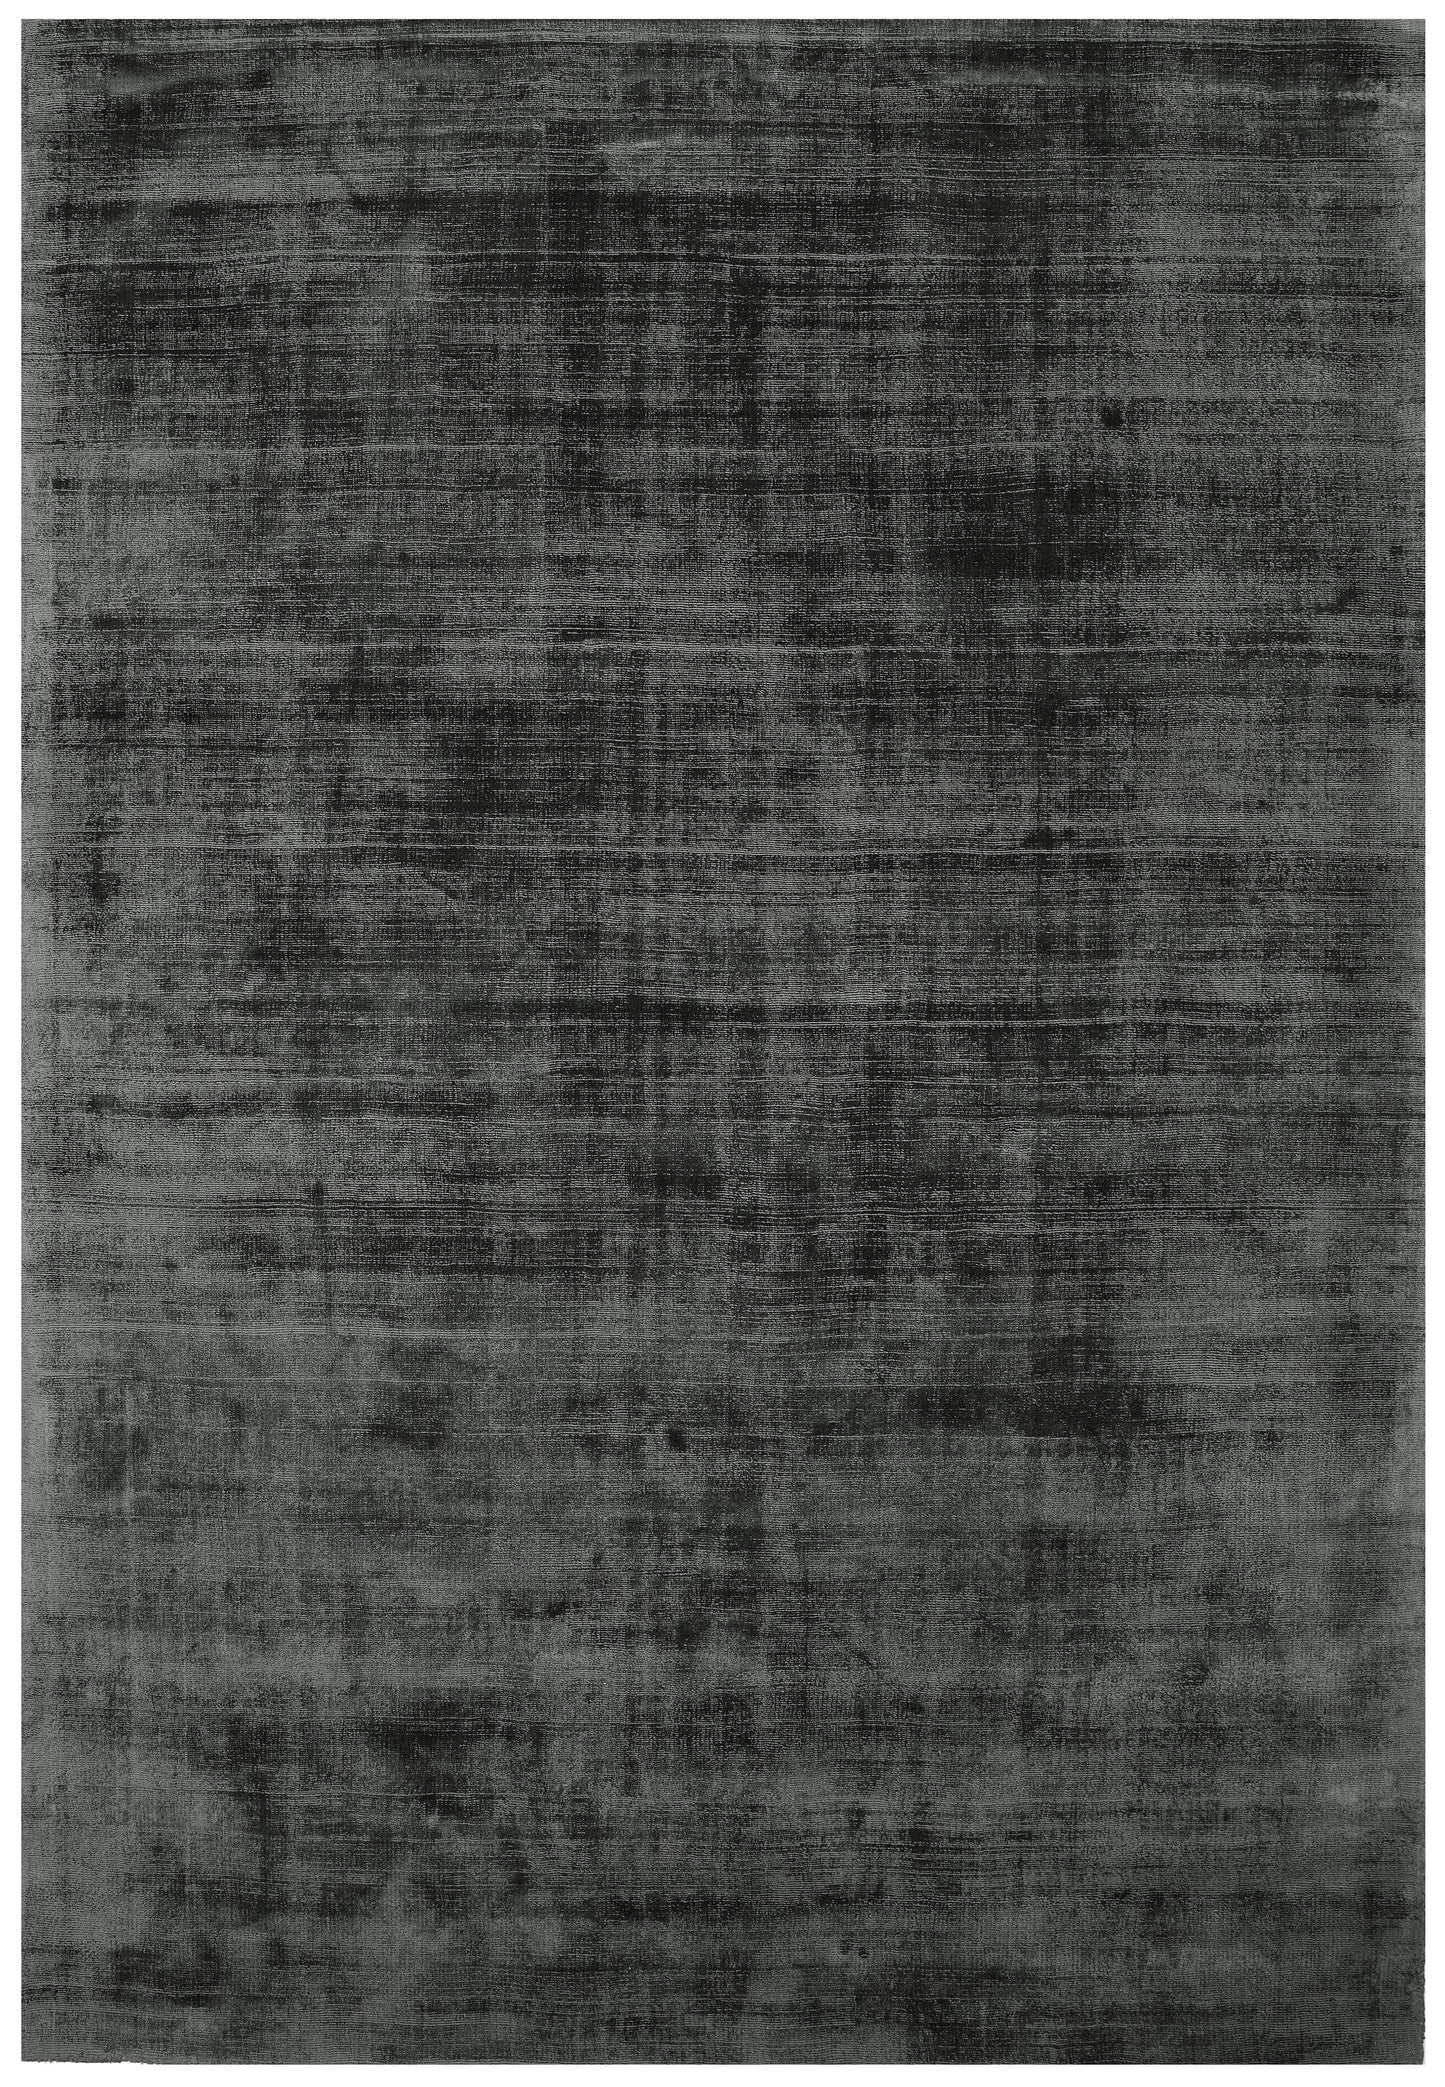 Asiatic Carpets Blade Hand Woven Rug Charcoal - 120 x 170cm